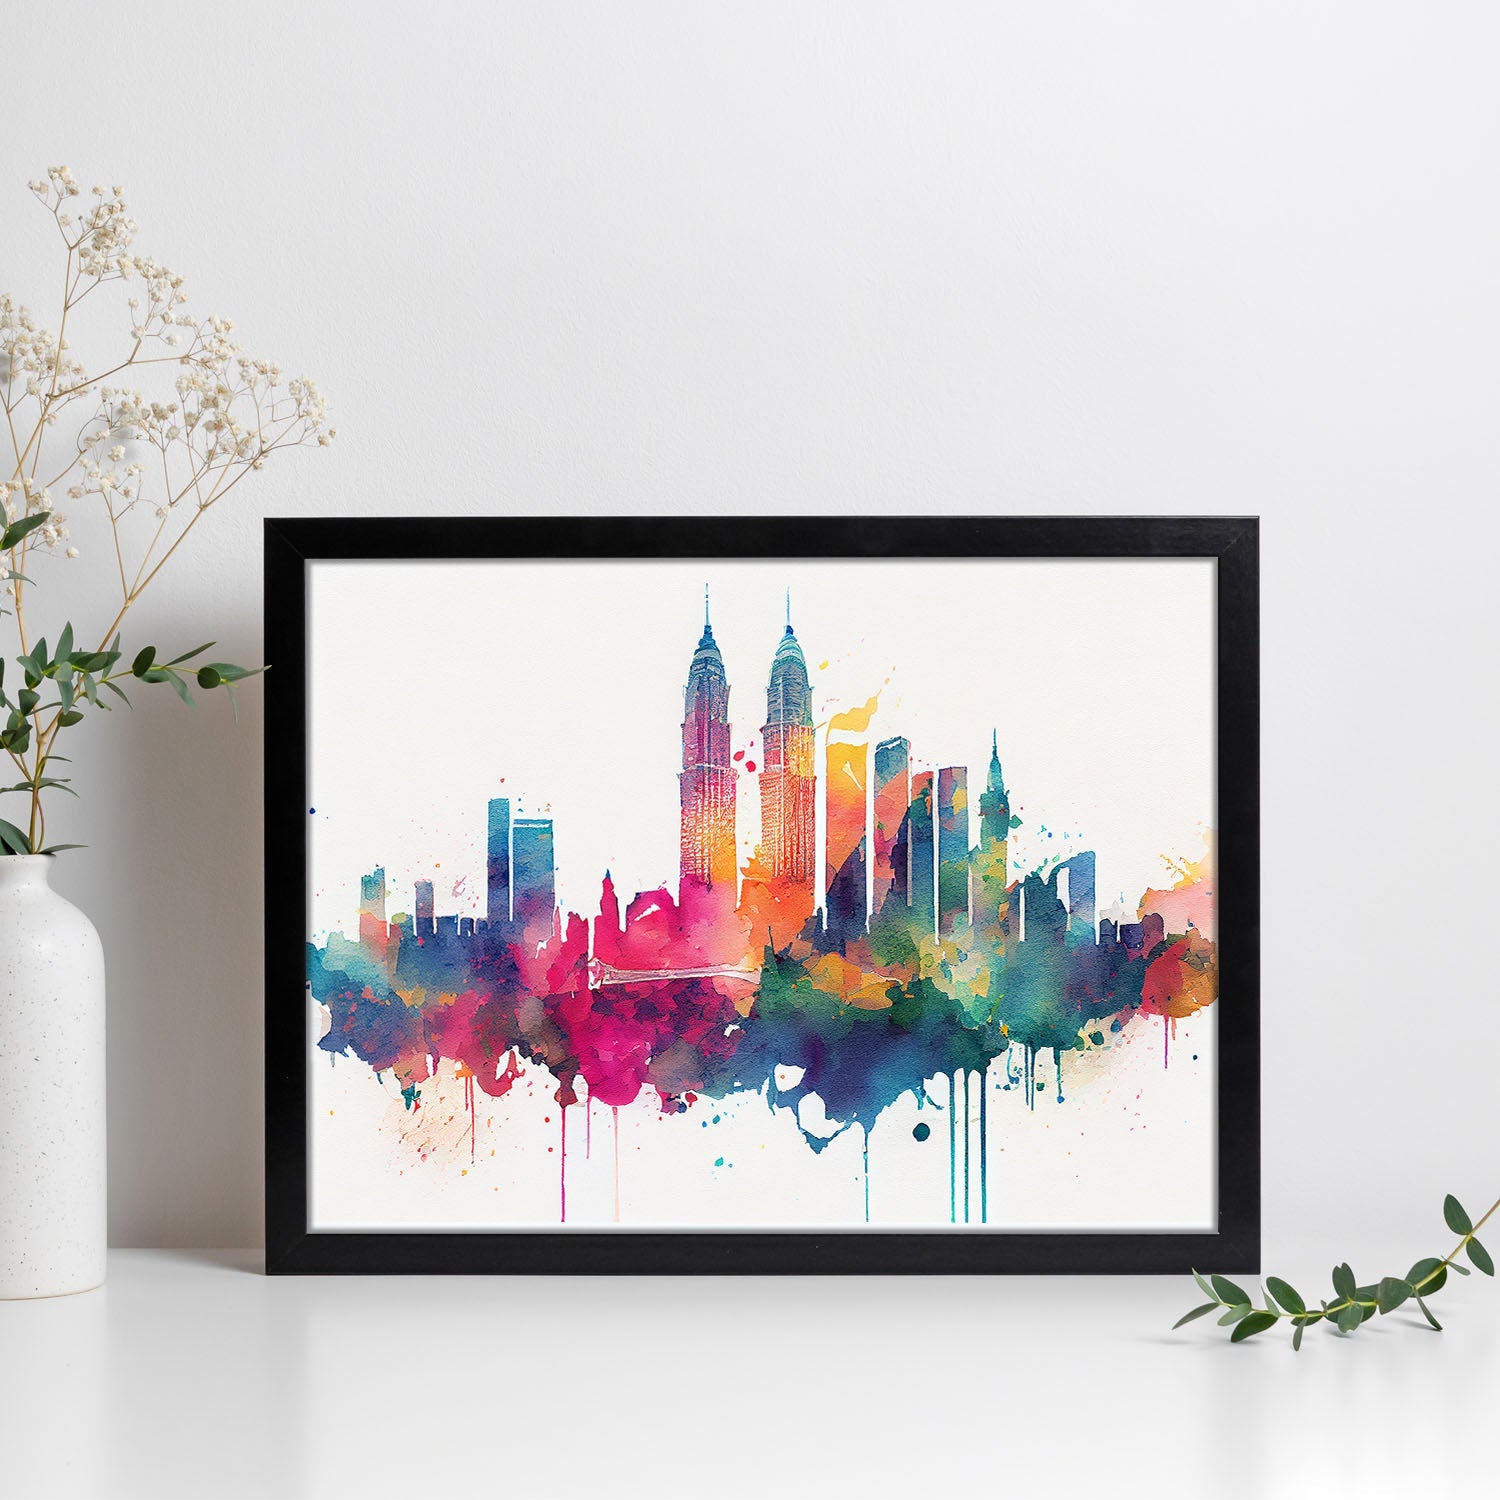 Nacnic watercolor of a skyline of the city of Kuala Lumpur_1. Aesthetic Wall Art Prints for Bedroom or Living Room Design.-Artwork-Nacnic-A4-Sin Marco-Nacnic Estudio SL